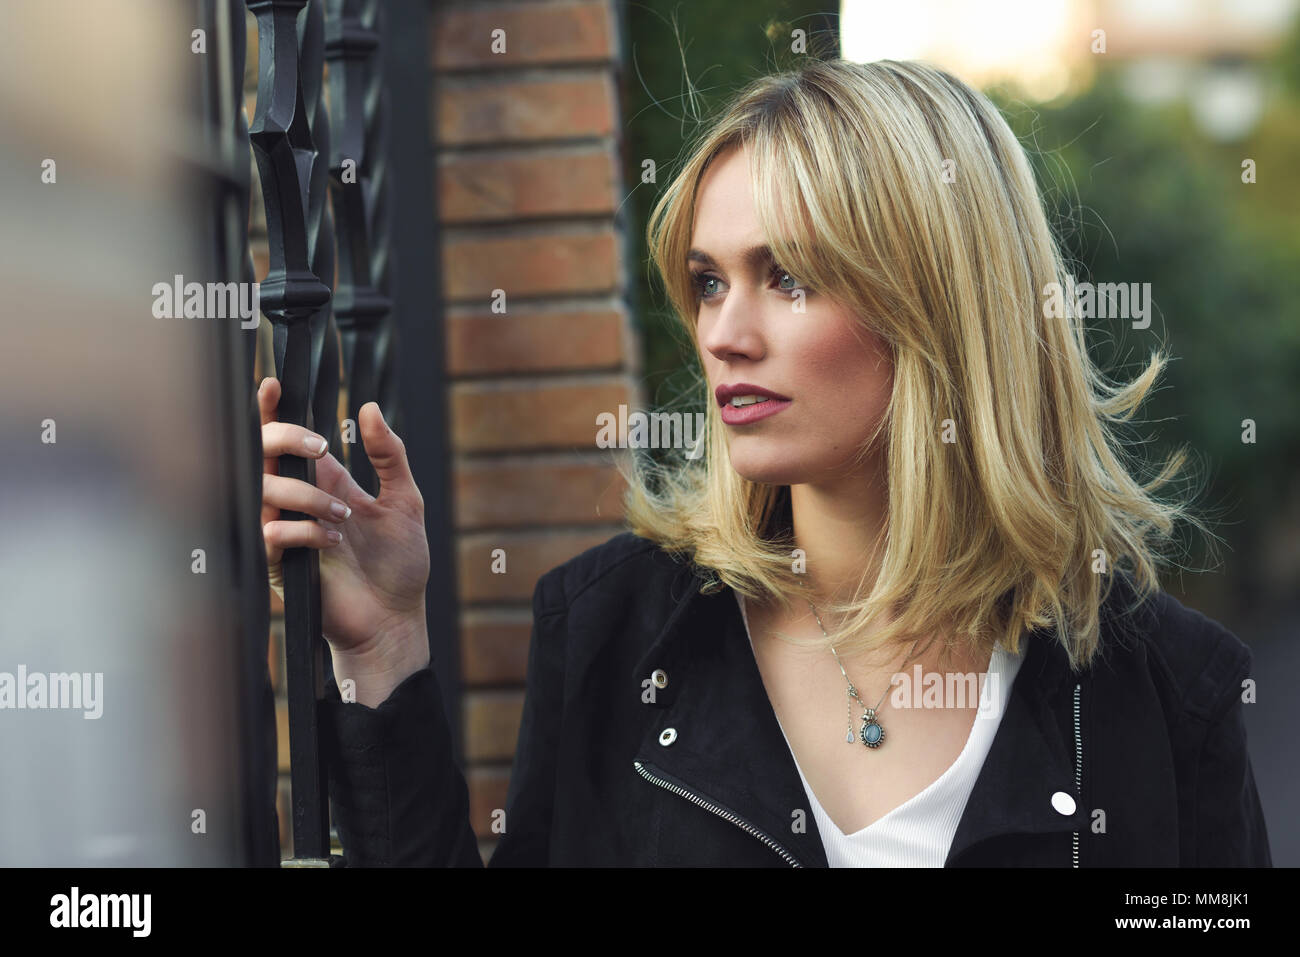 Attractive blonde woman standing in urban background with lost look. Young girl wearing black zipper jacket. Pretty female with straight hair hairstyl Stock Photo